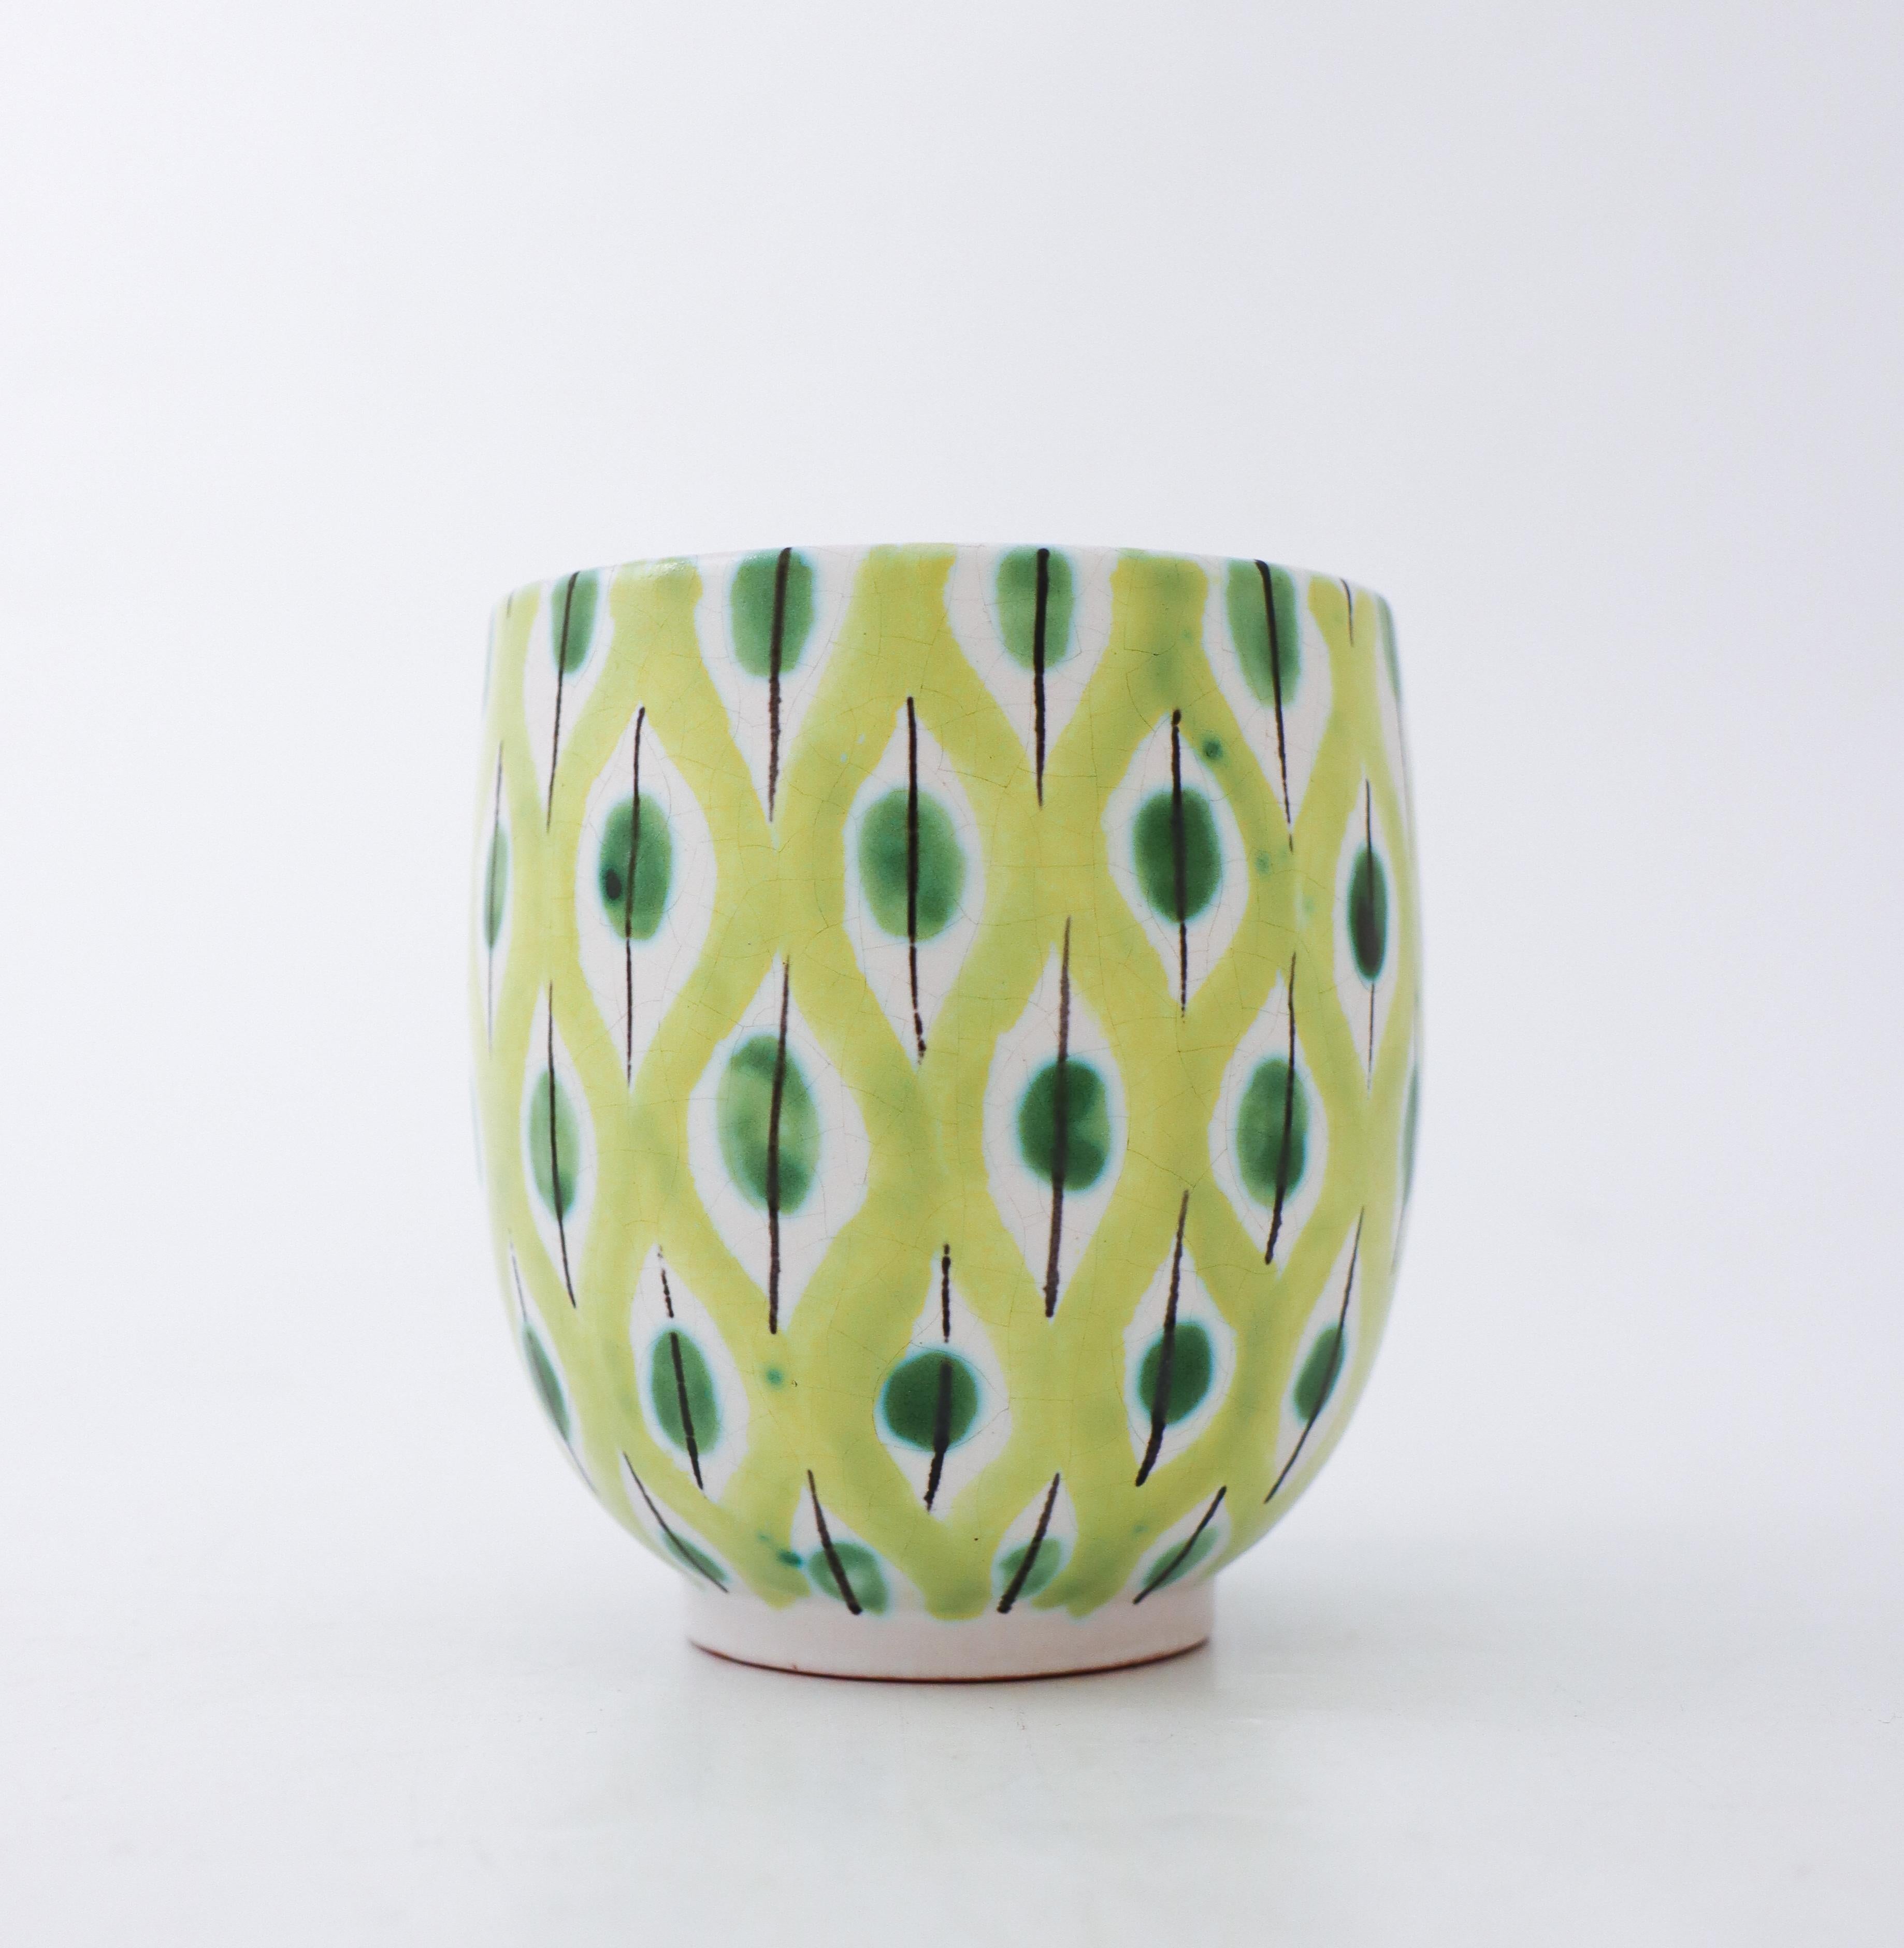 A vase in faience designed by Stig Lindberg at Gustavsbergs Studio in Stockholm, it is 9.5 cm (3.8